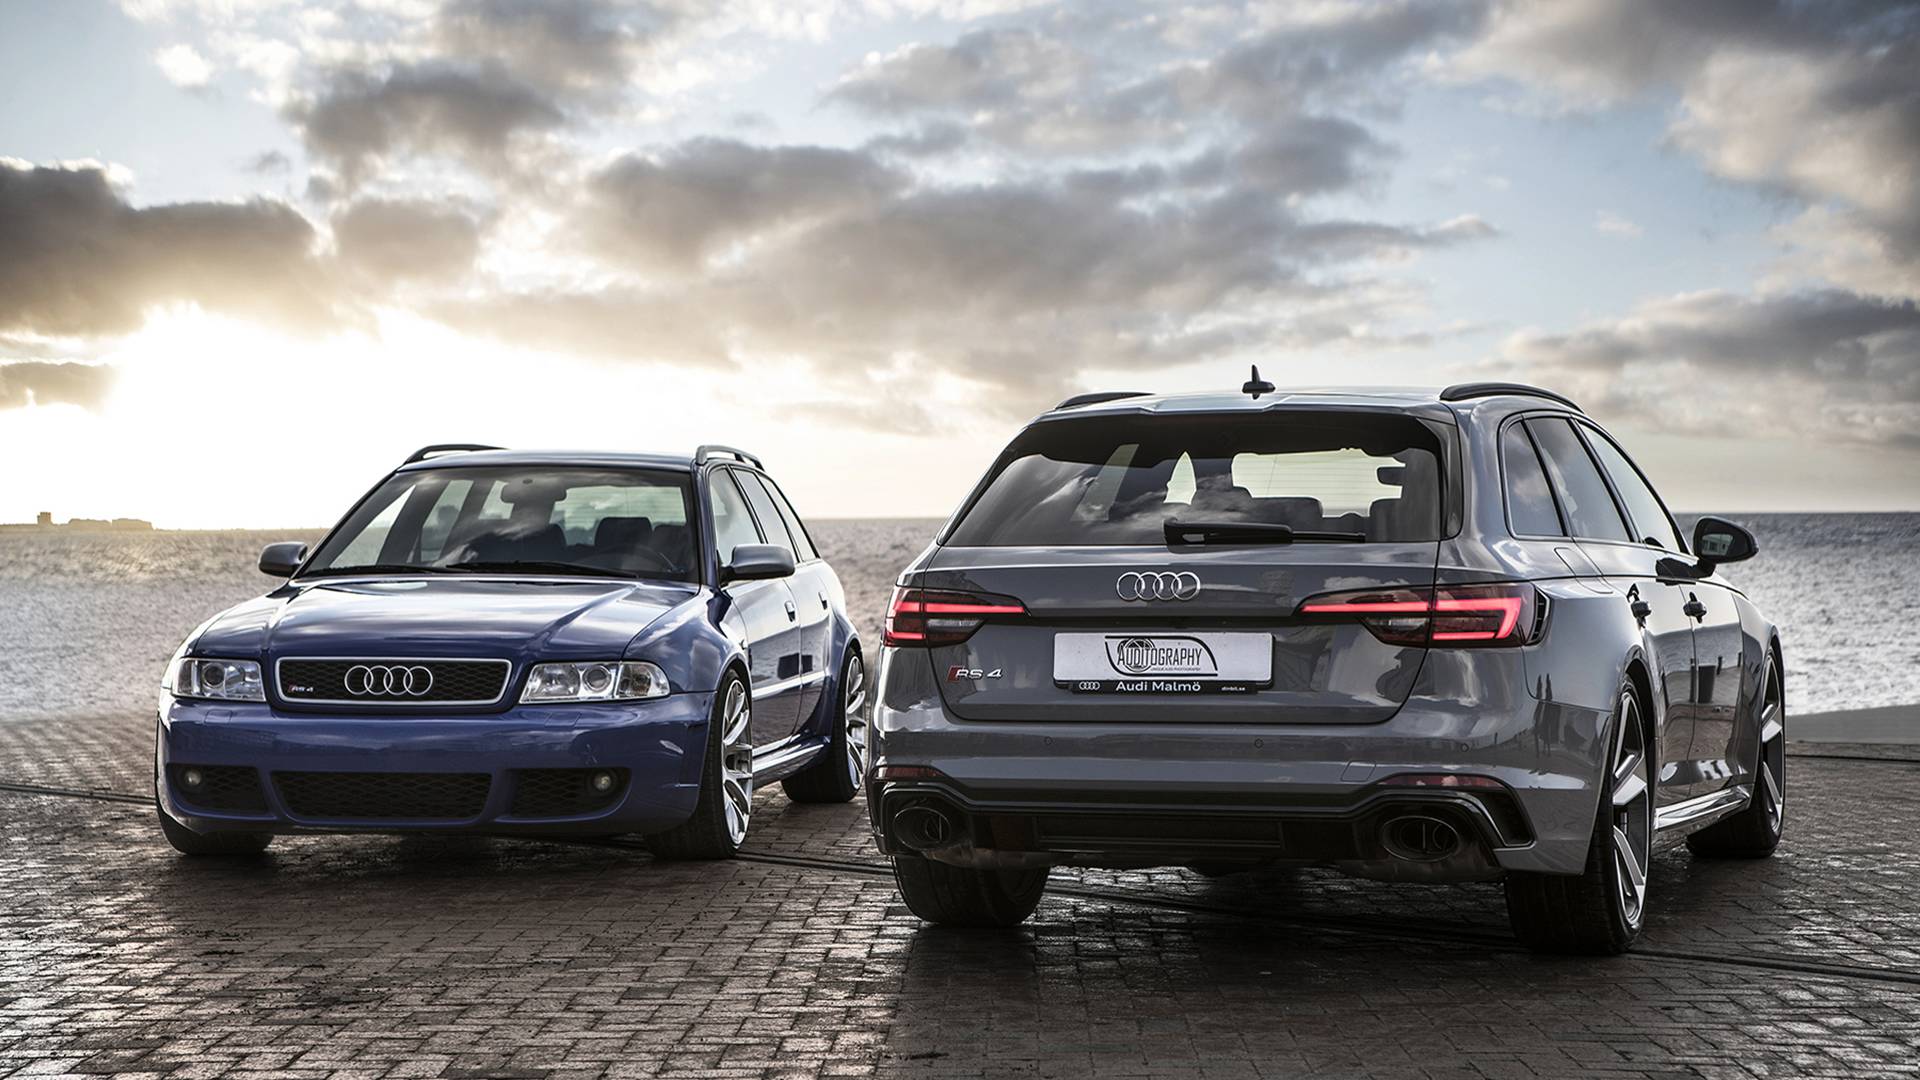 Past Meets Present: 2001 Audi RS4 Avant Joined By 2018 Model